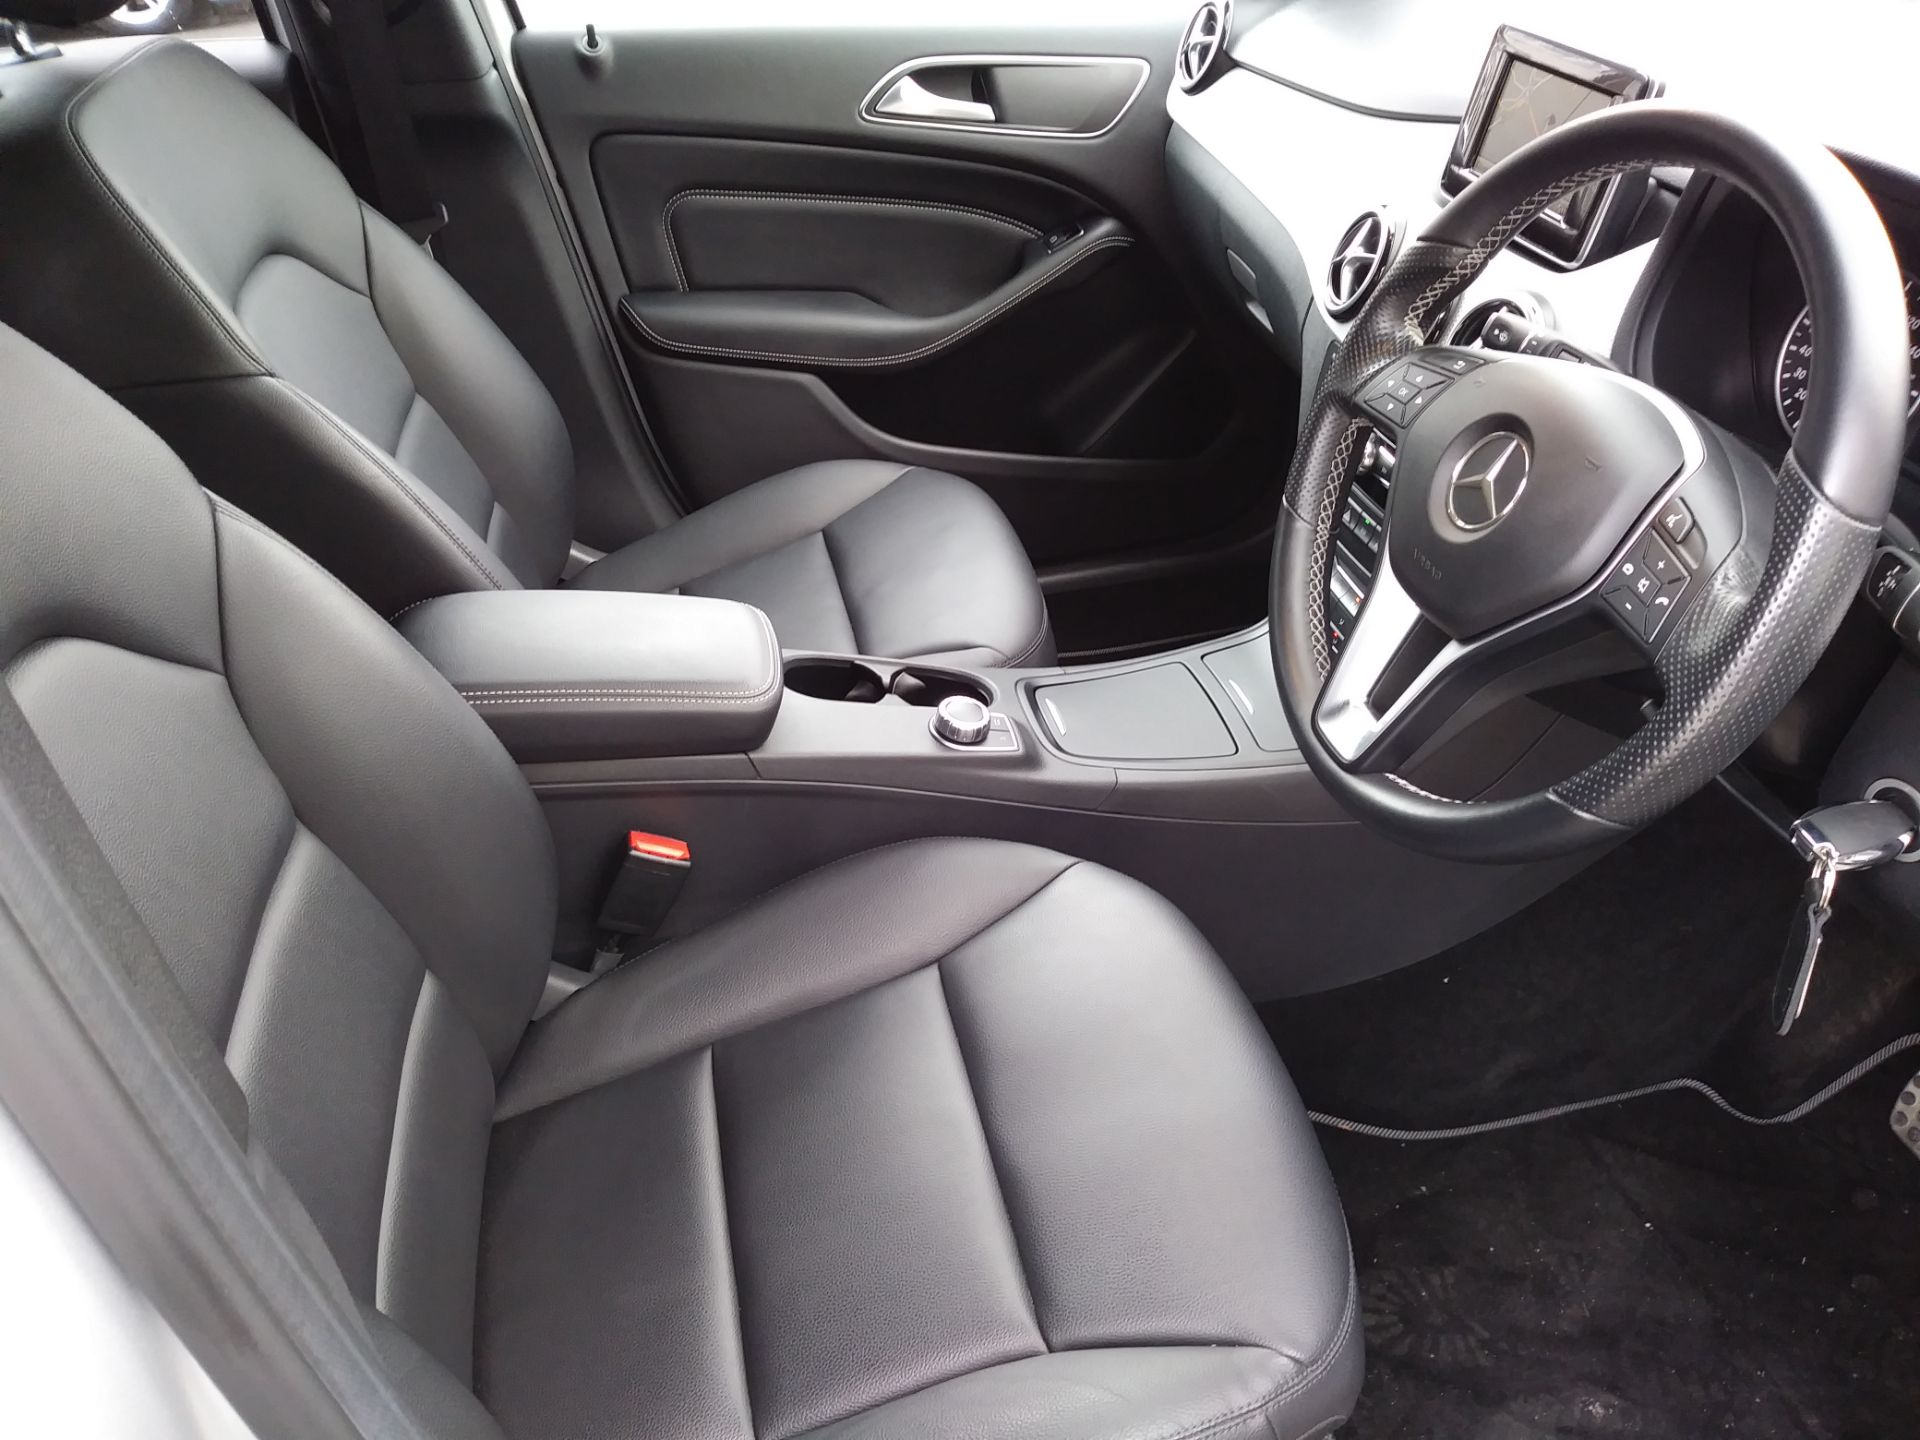 Mercedes B Class 1.5 B180 CDI Sport 7G-DCT 5dr - Automatic, Diesel, 103000 Miles - Image 19 of 39